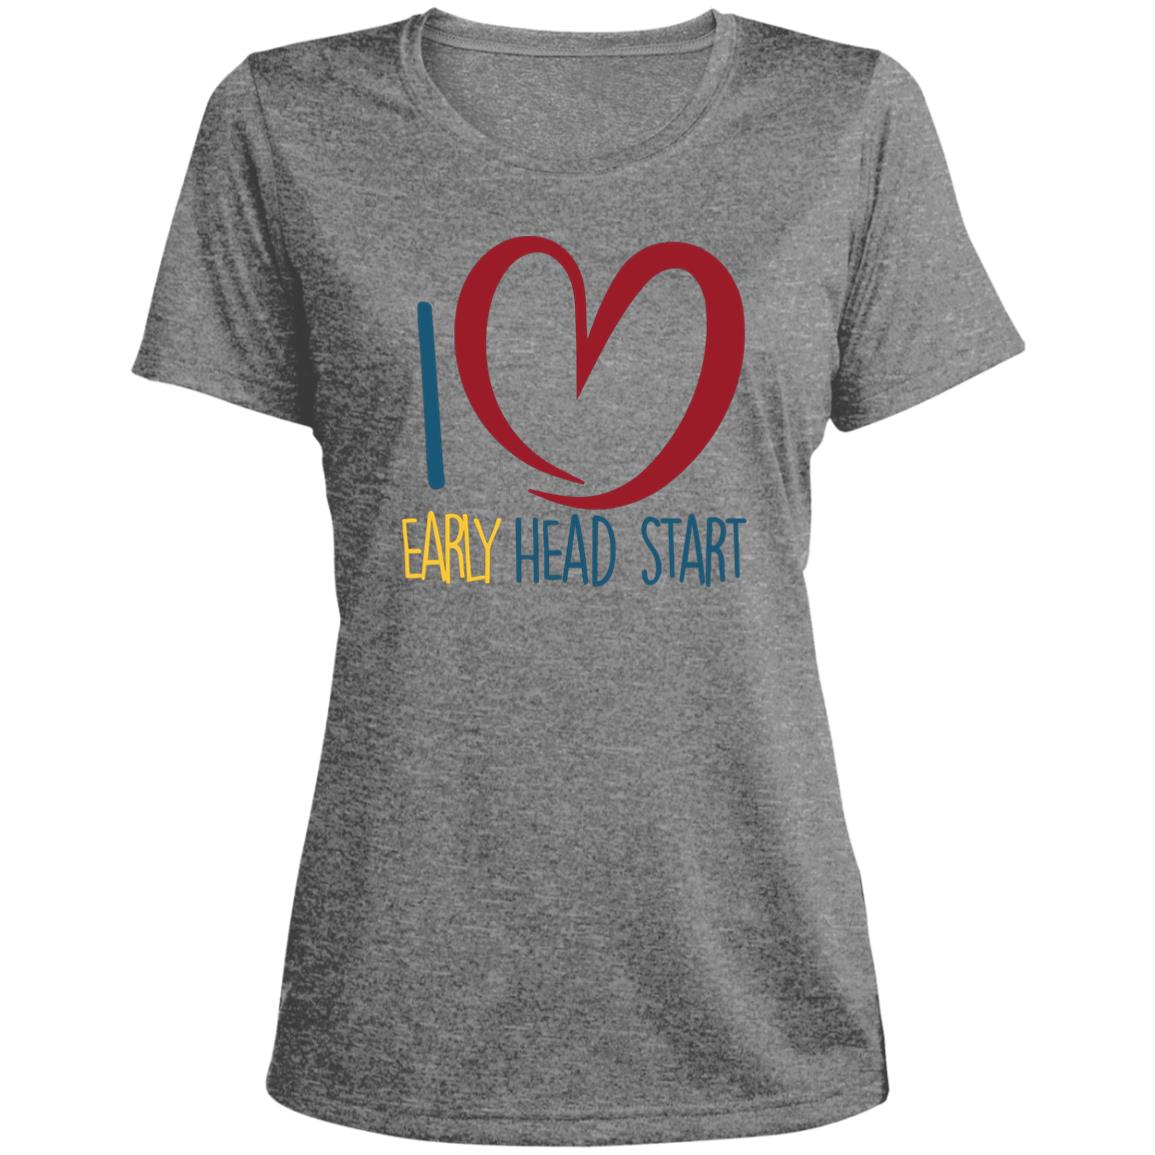 I love Early Head Start athletic scoop neck tee